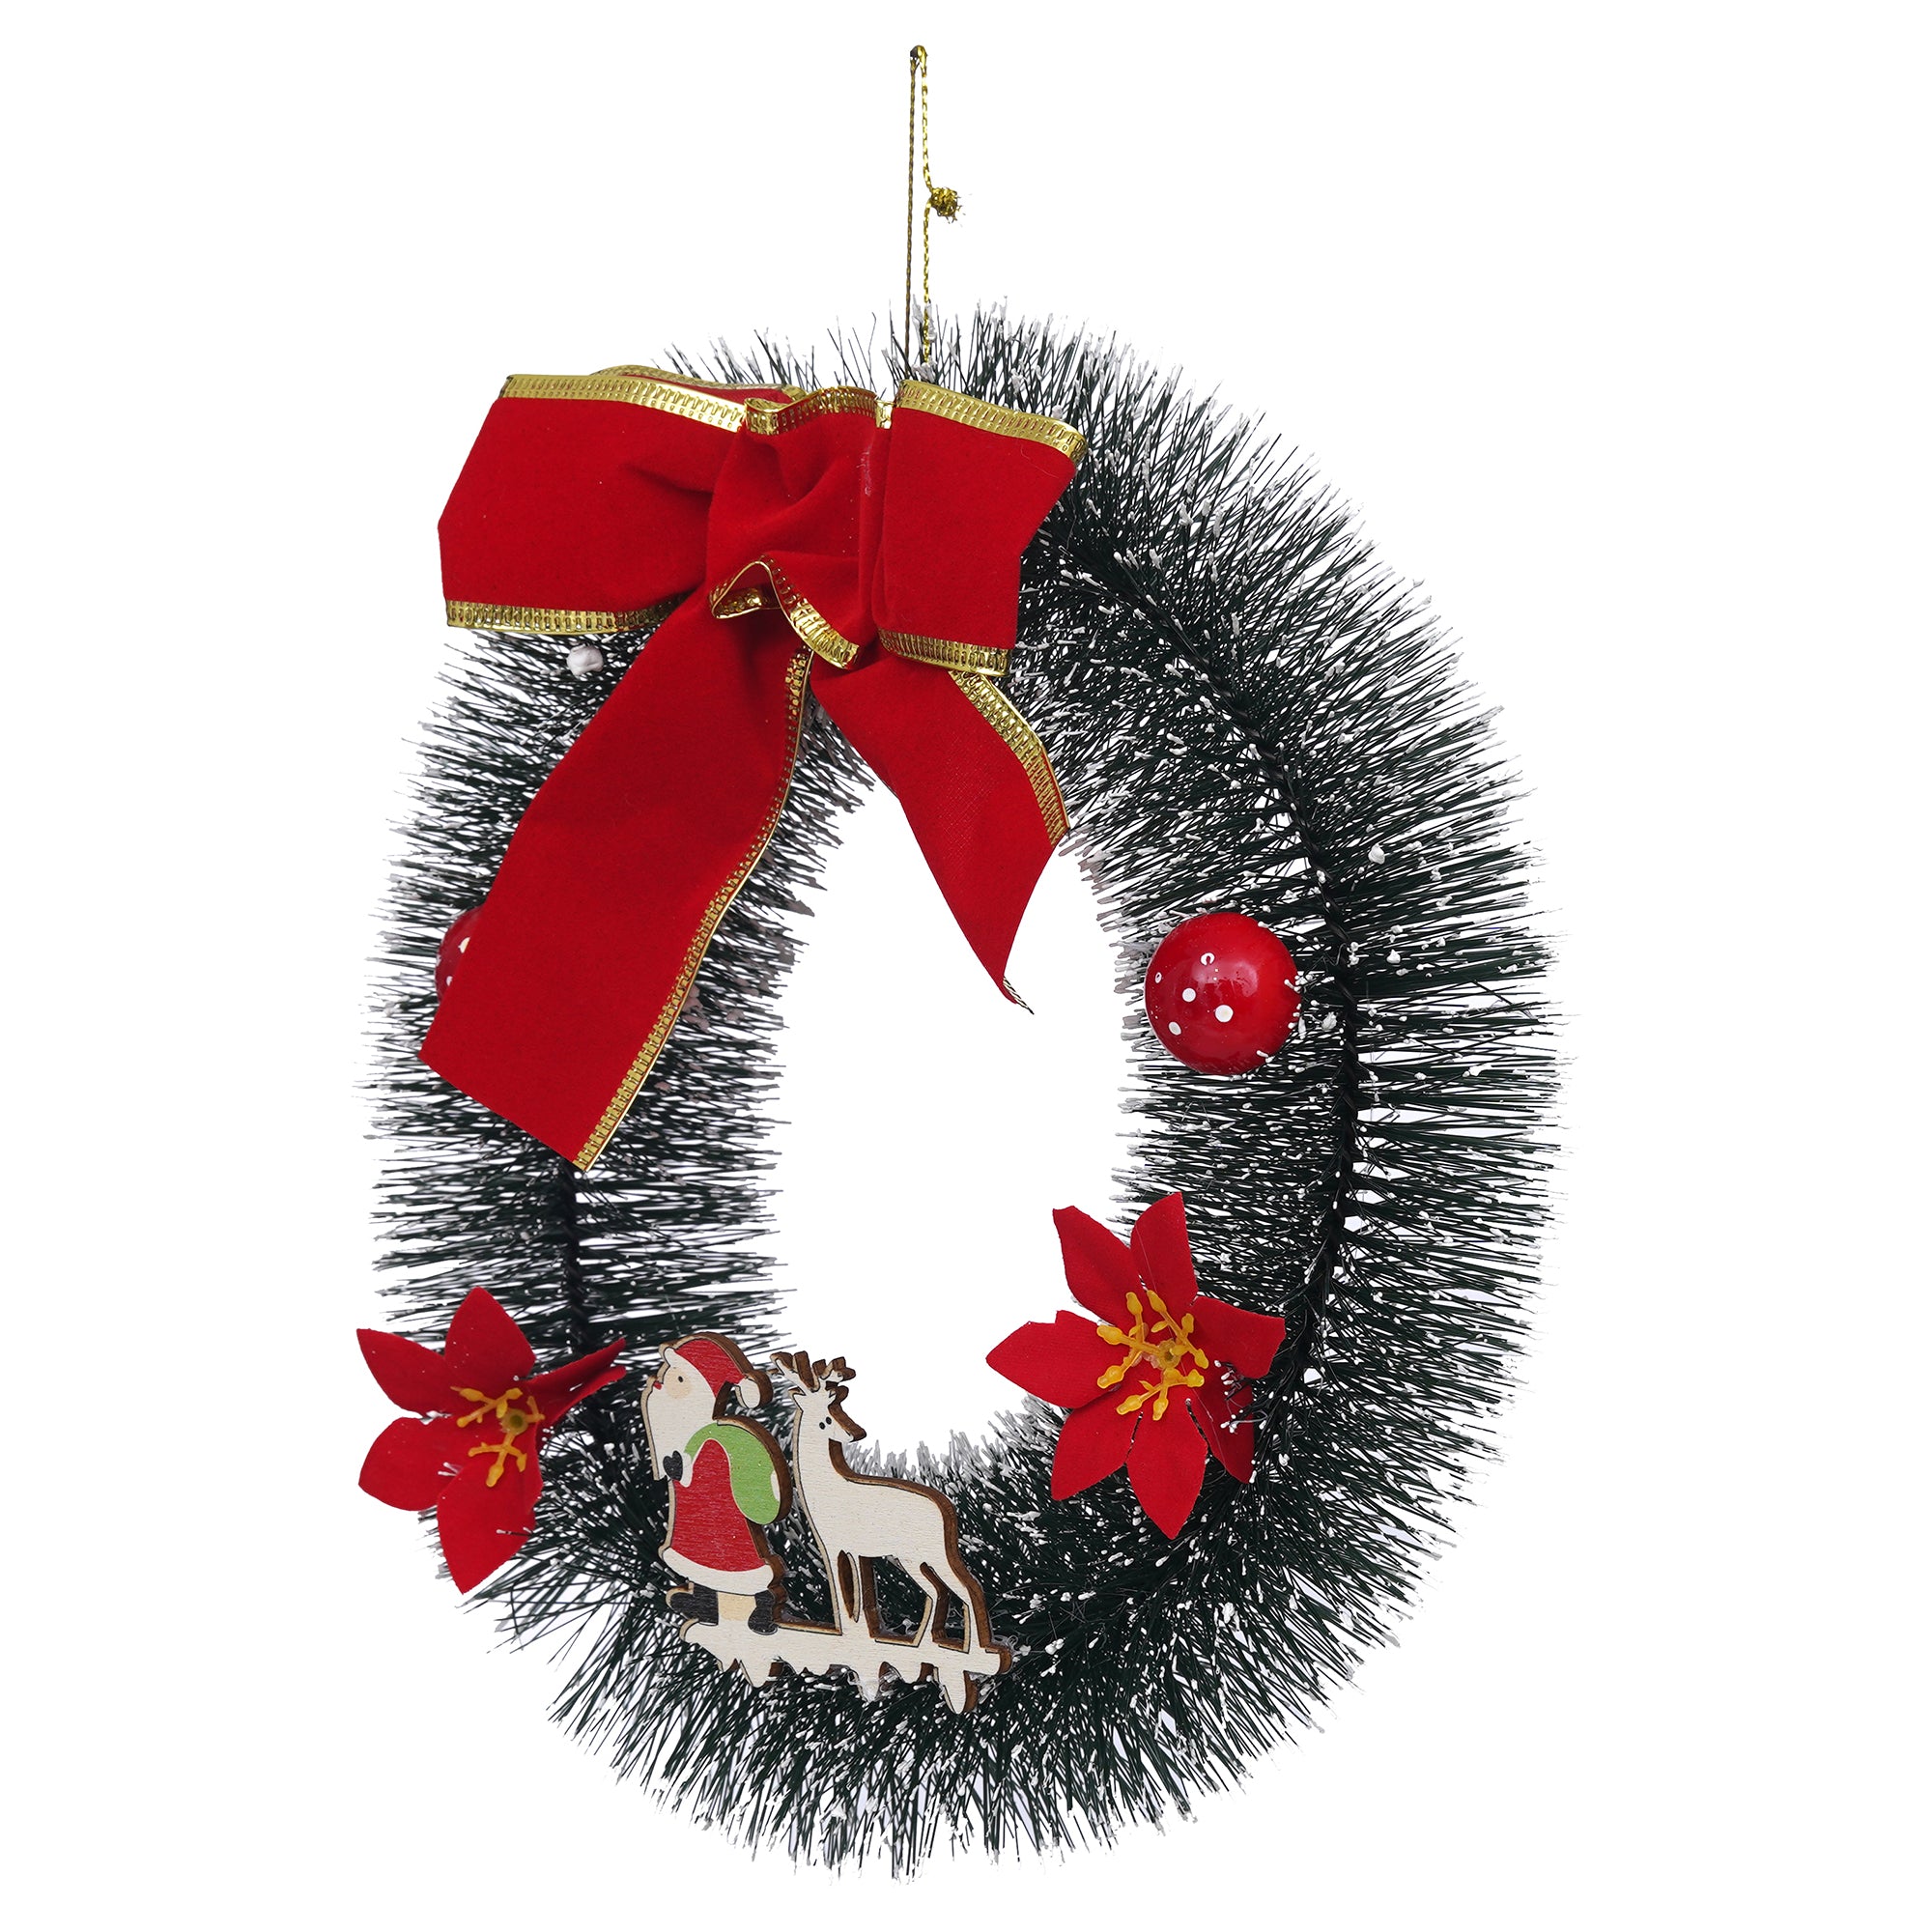 eCraftIndia Christmas Wreath with Santa Claus, Reindeer, Flower, Ball, Ribbon  Christmas Front Door Ornament and Wall Decoration  Artificial Pine Garland For Xmas Party Decor 6